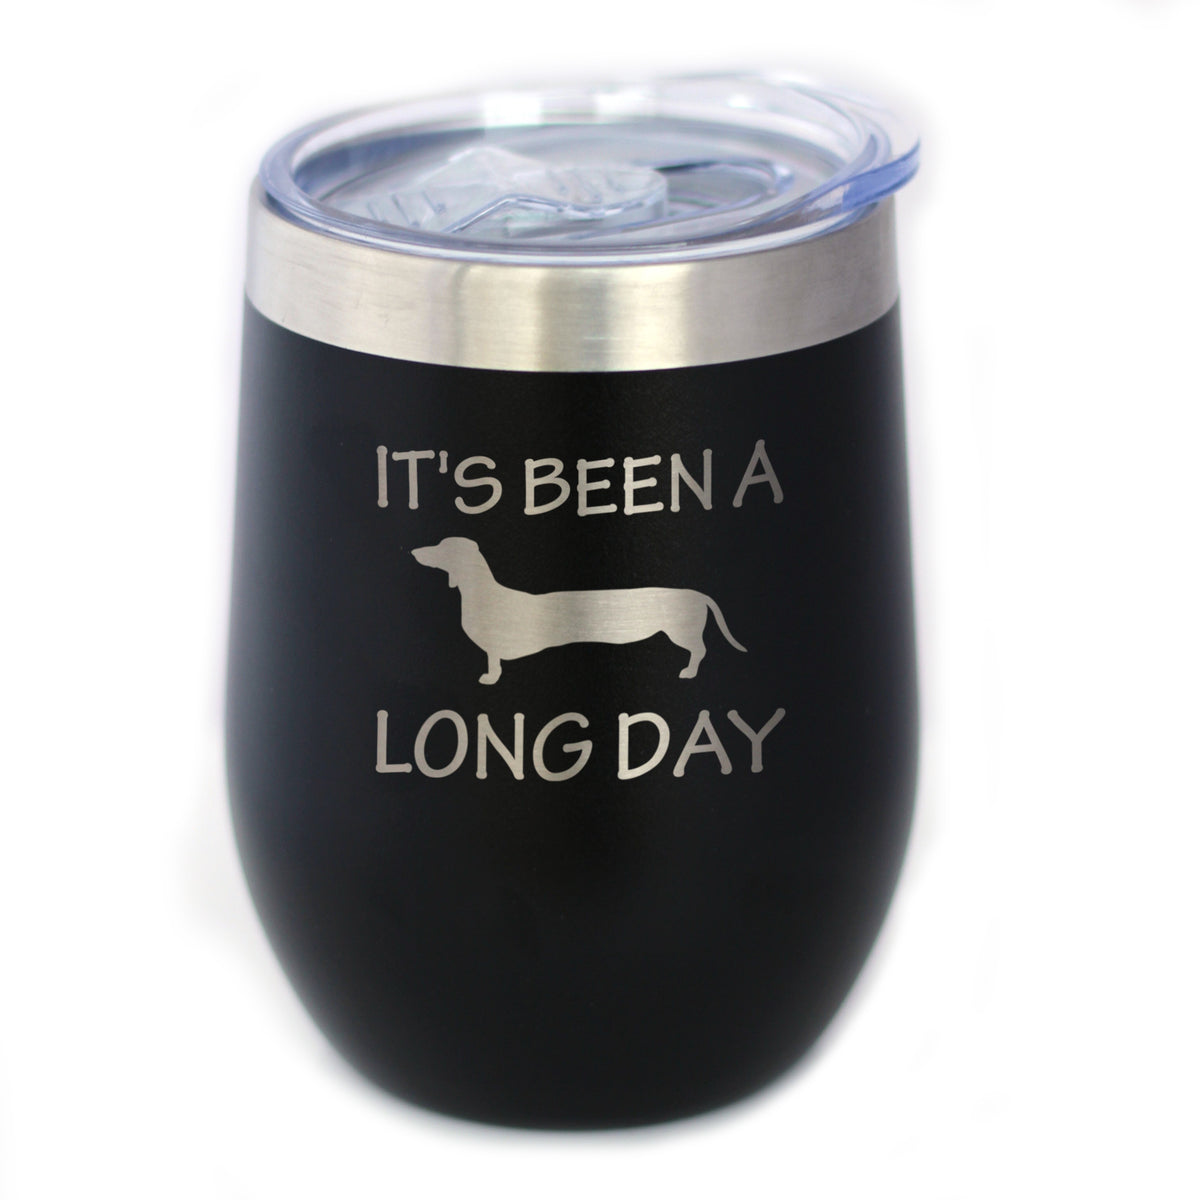 Been a Long Day - Dachshund Wine Tumbler with Sliding Lid - Stemless Stainless Steel Insulated Cup - Cute Funny Gift for Coworkers or Boss